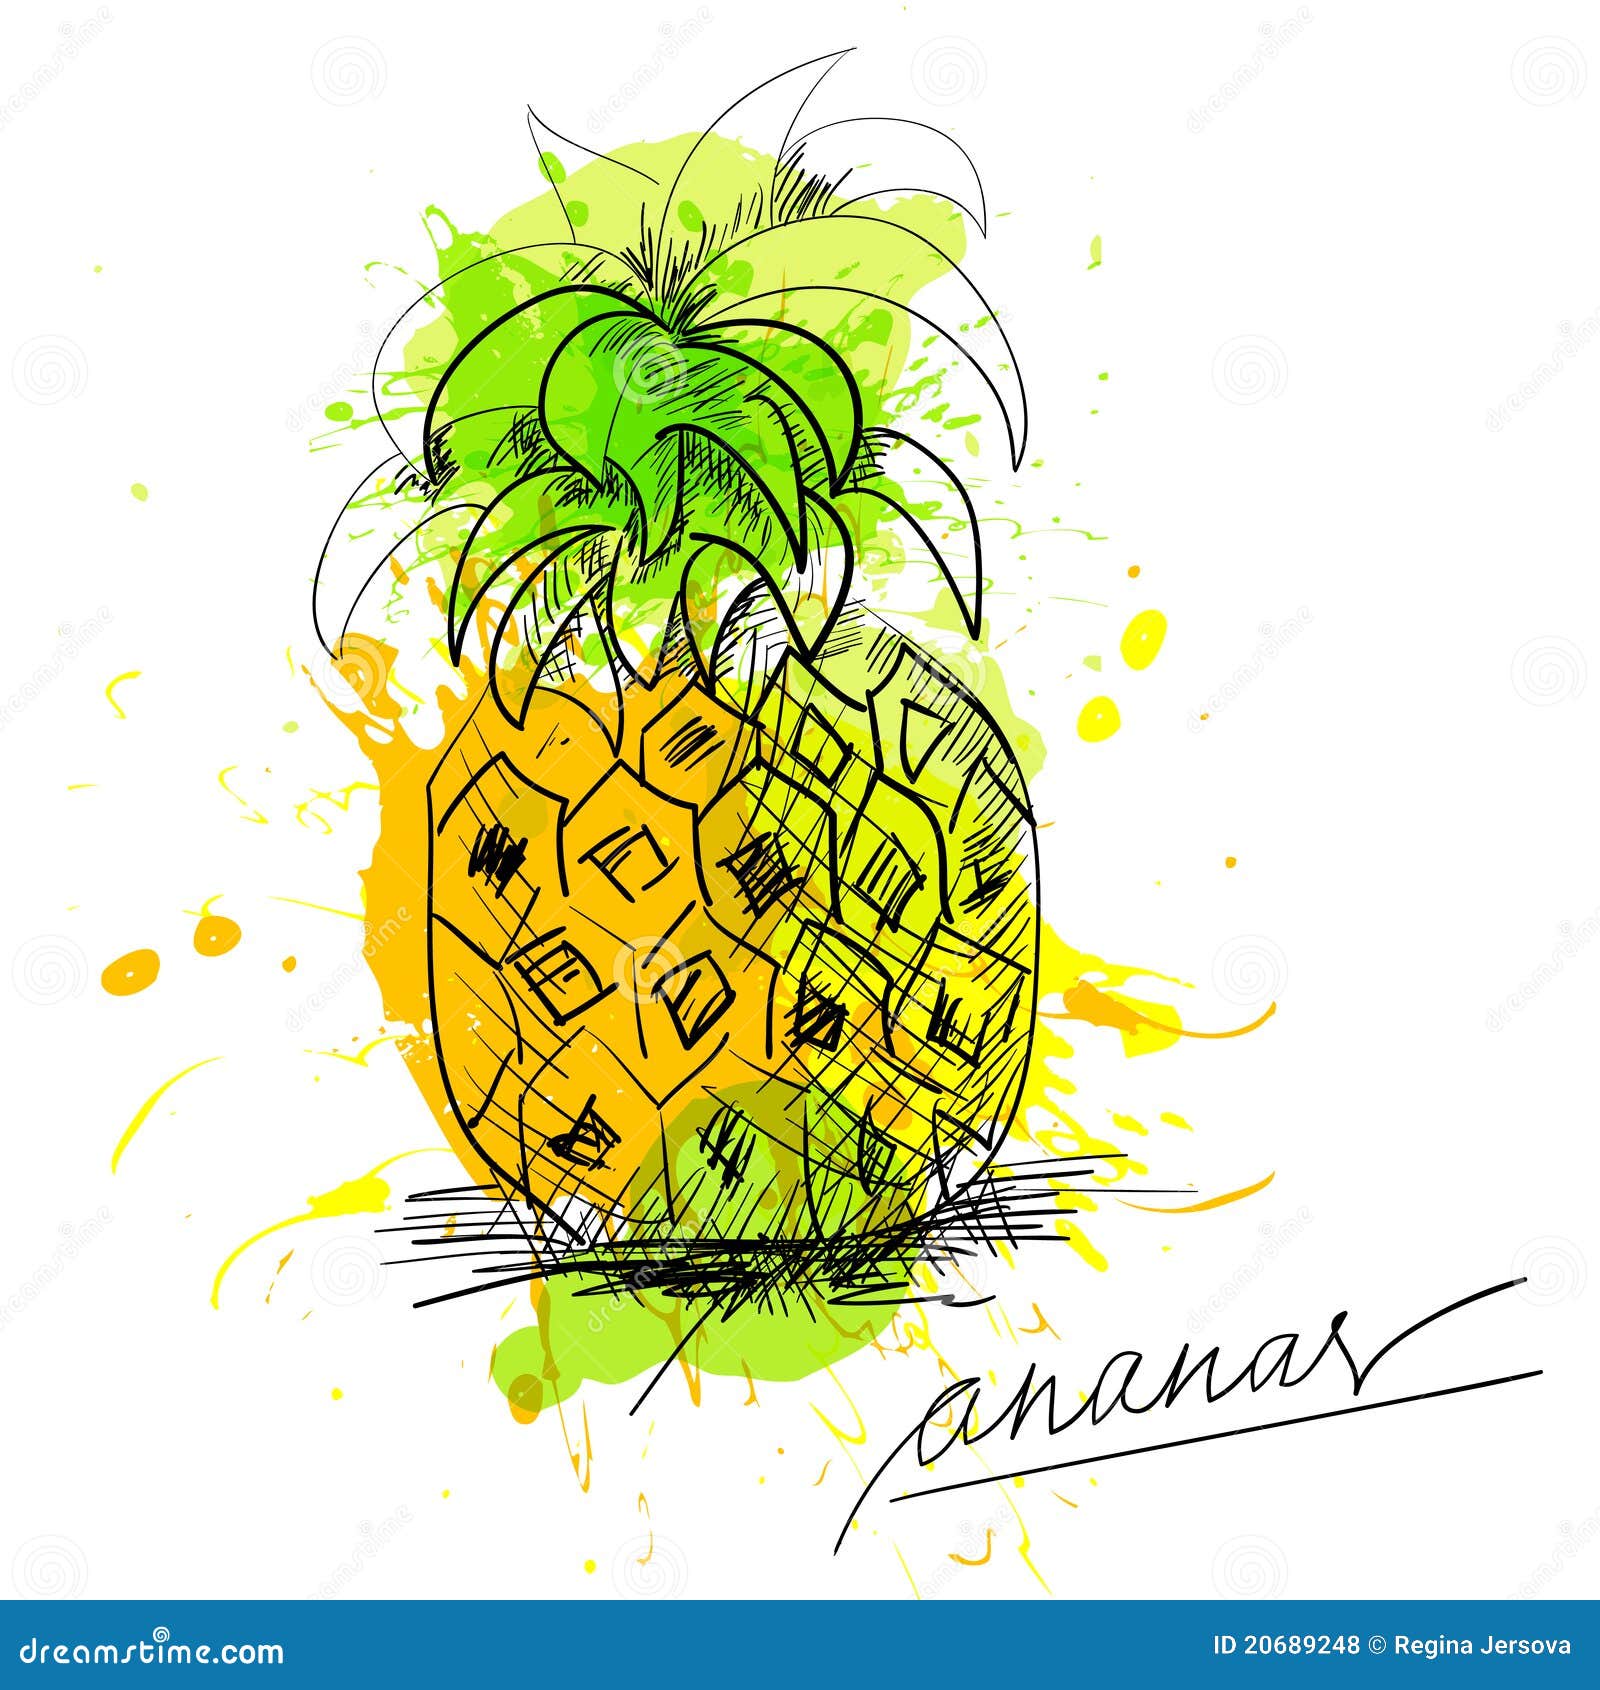 Sketch of pineapple stock vector. Illustration of dots - 20689248